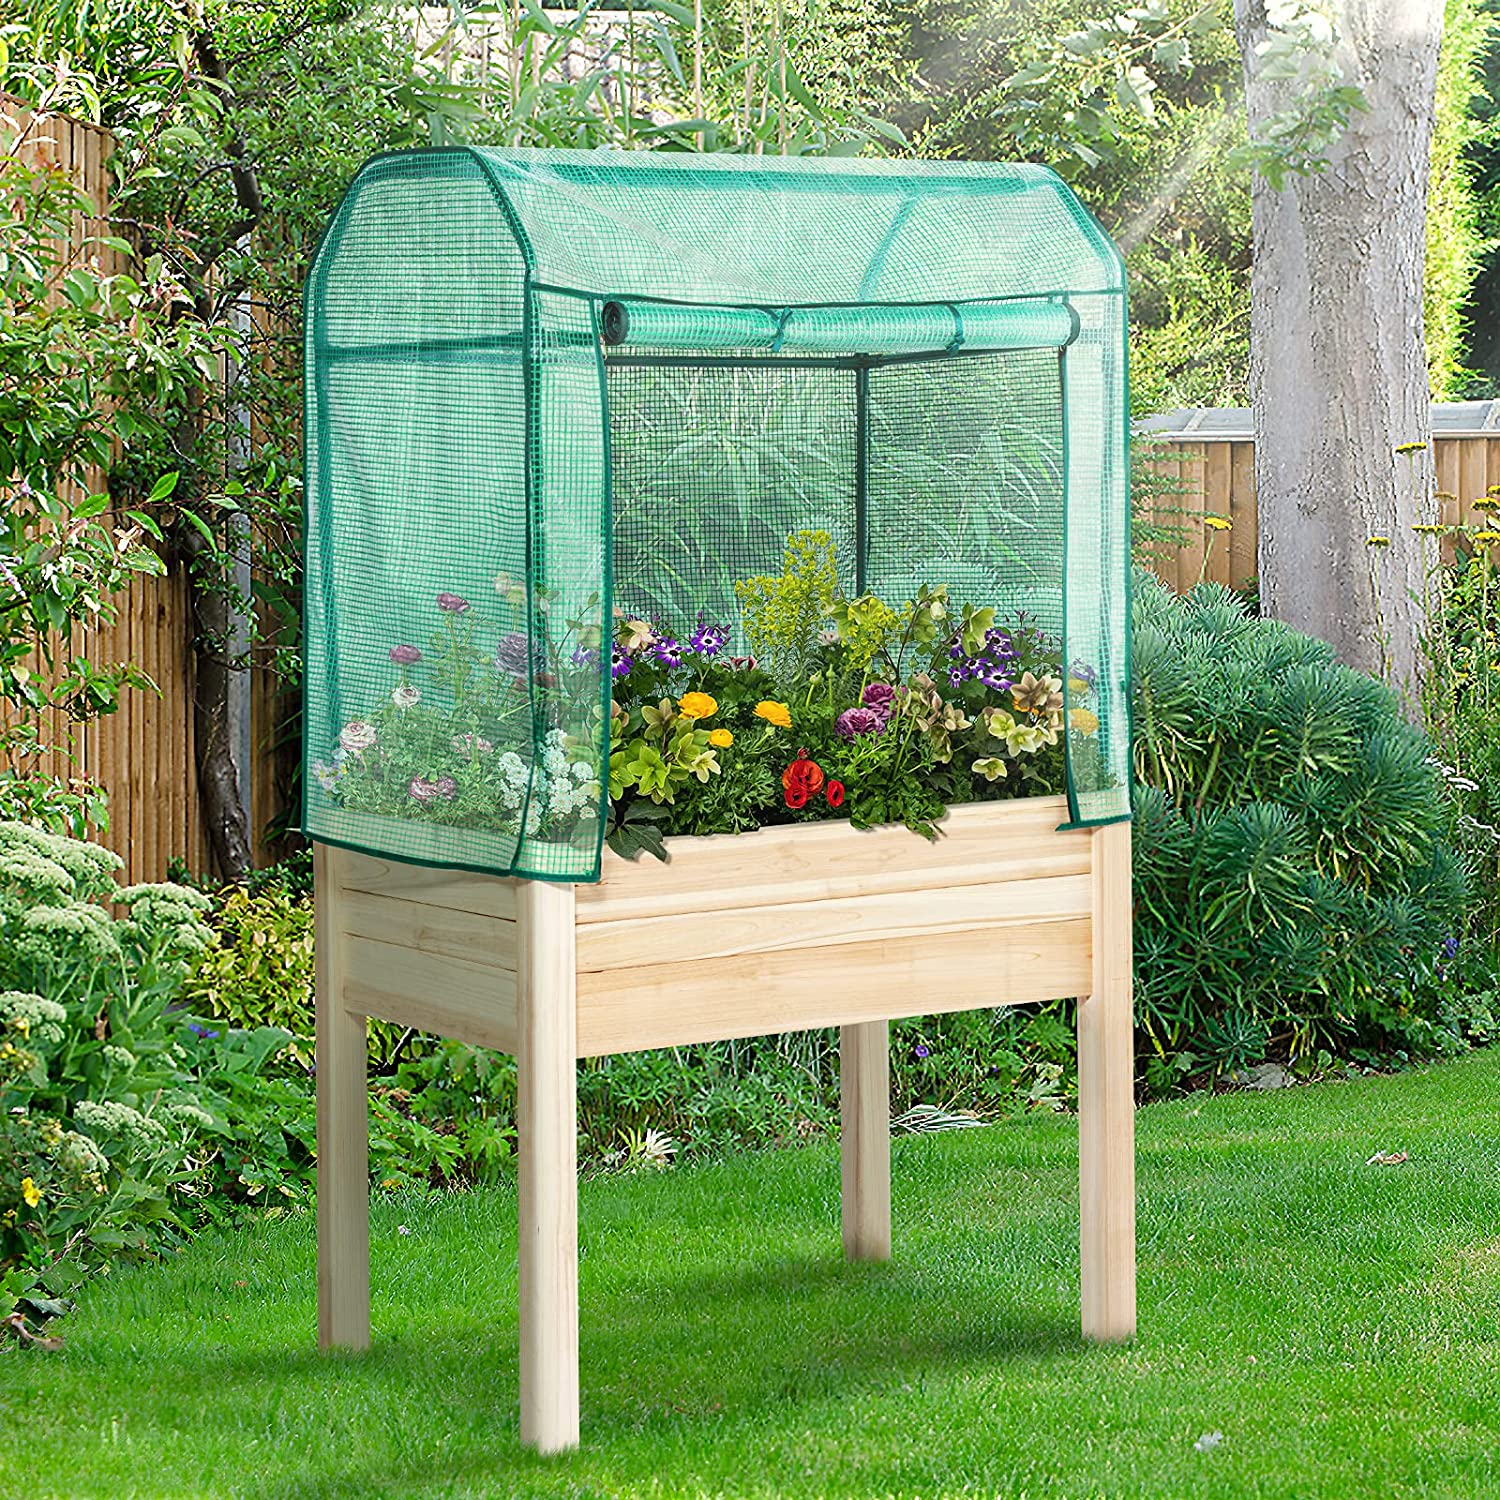 Elevated Wood Gardening Bed with Green House Cover